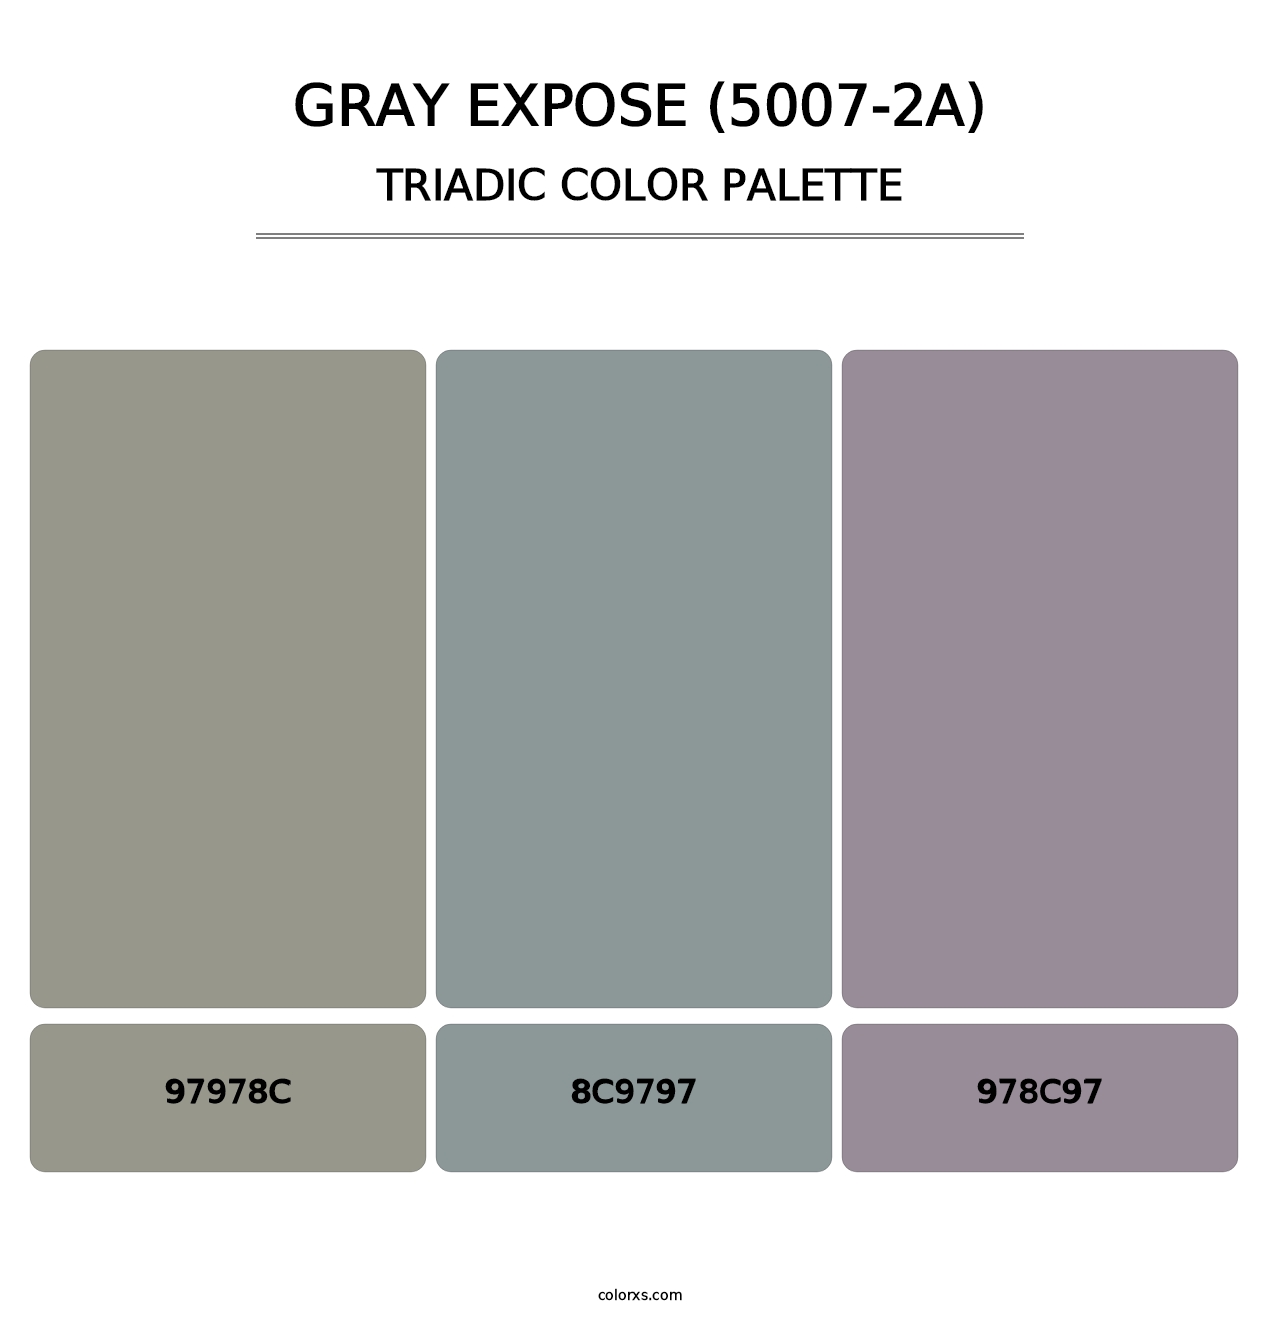 Gray Expose (5007-2A) - Triadic Color Palette